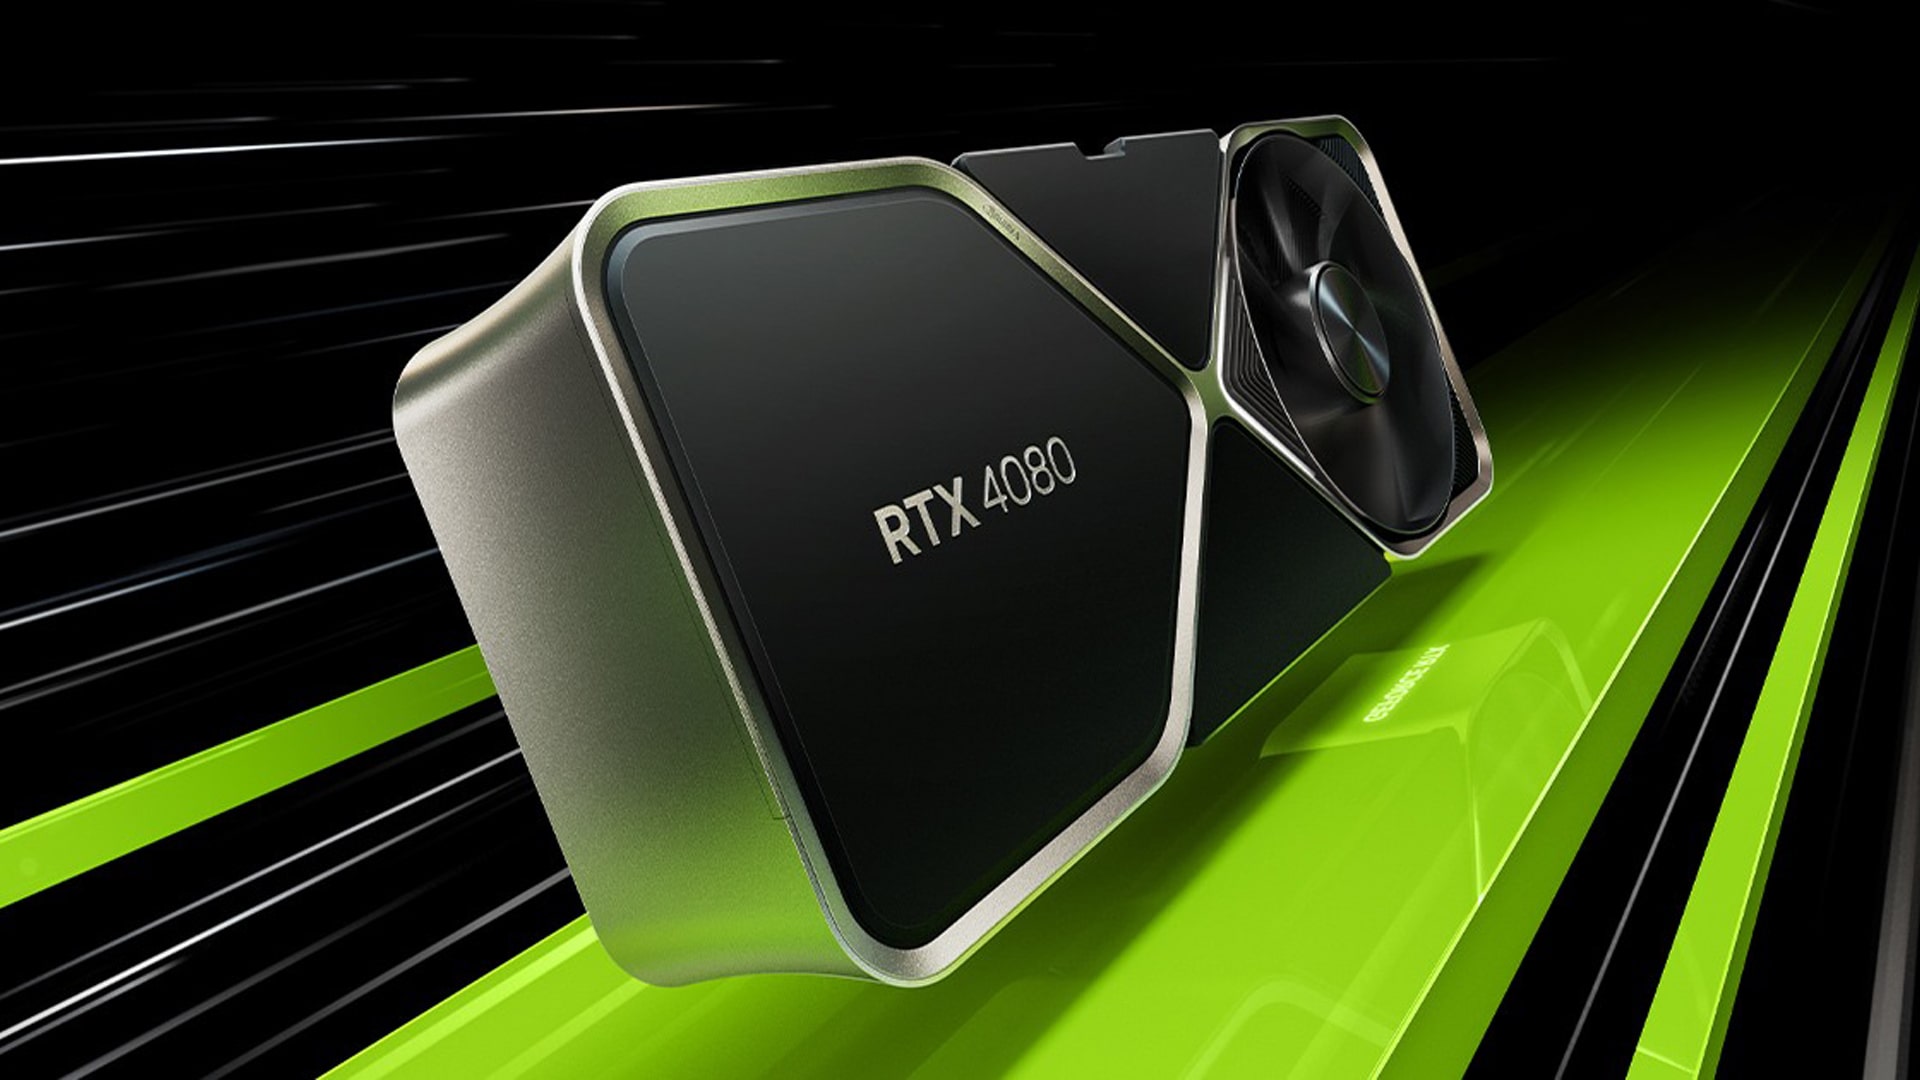 NVIDIA GeForce RTX 4080 graphics card showcasing its design and features